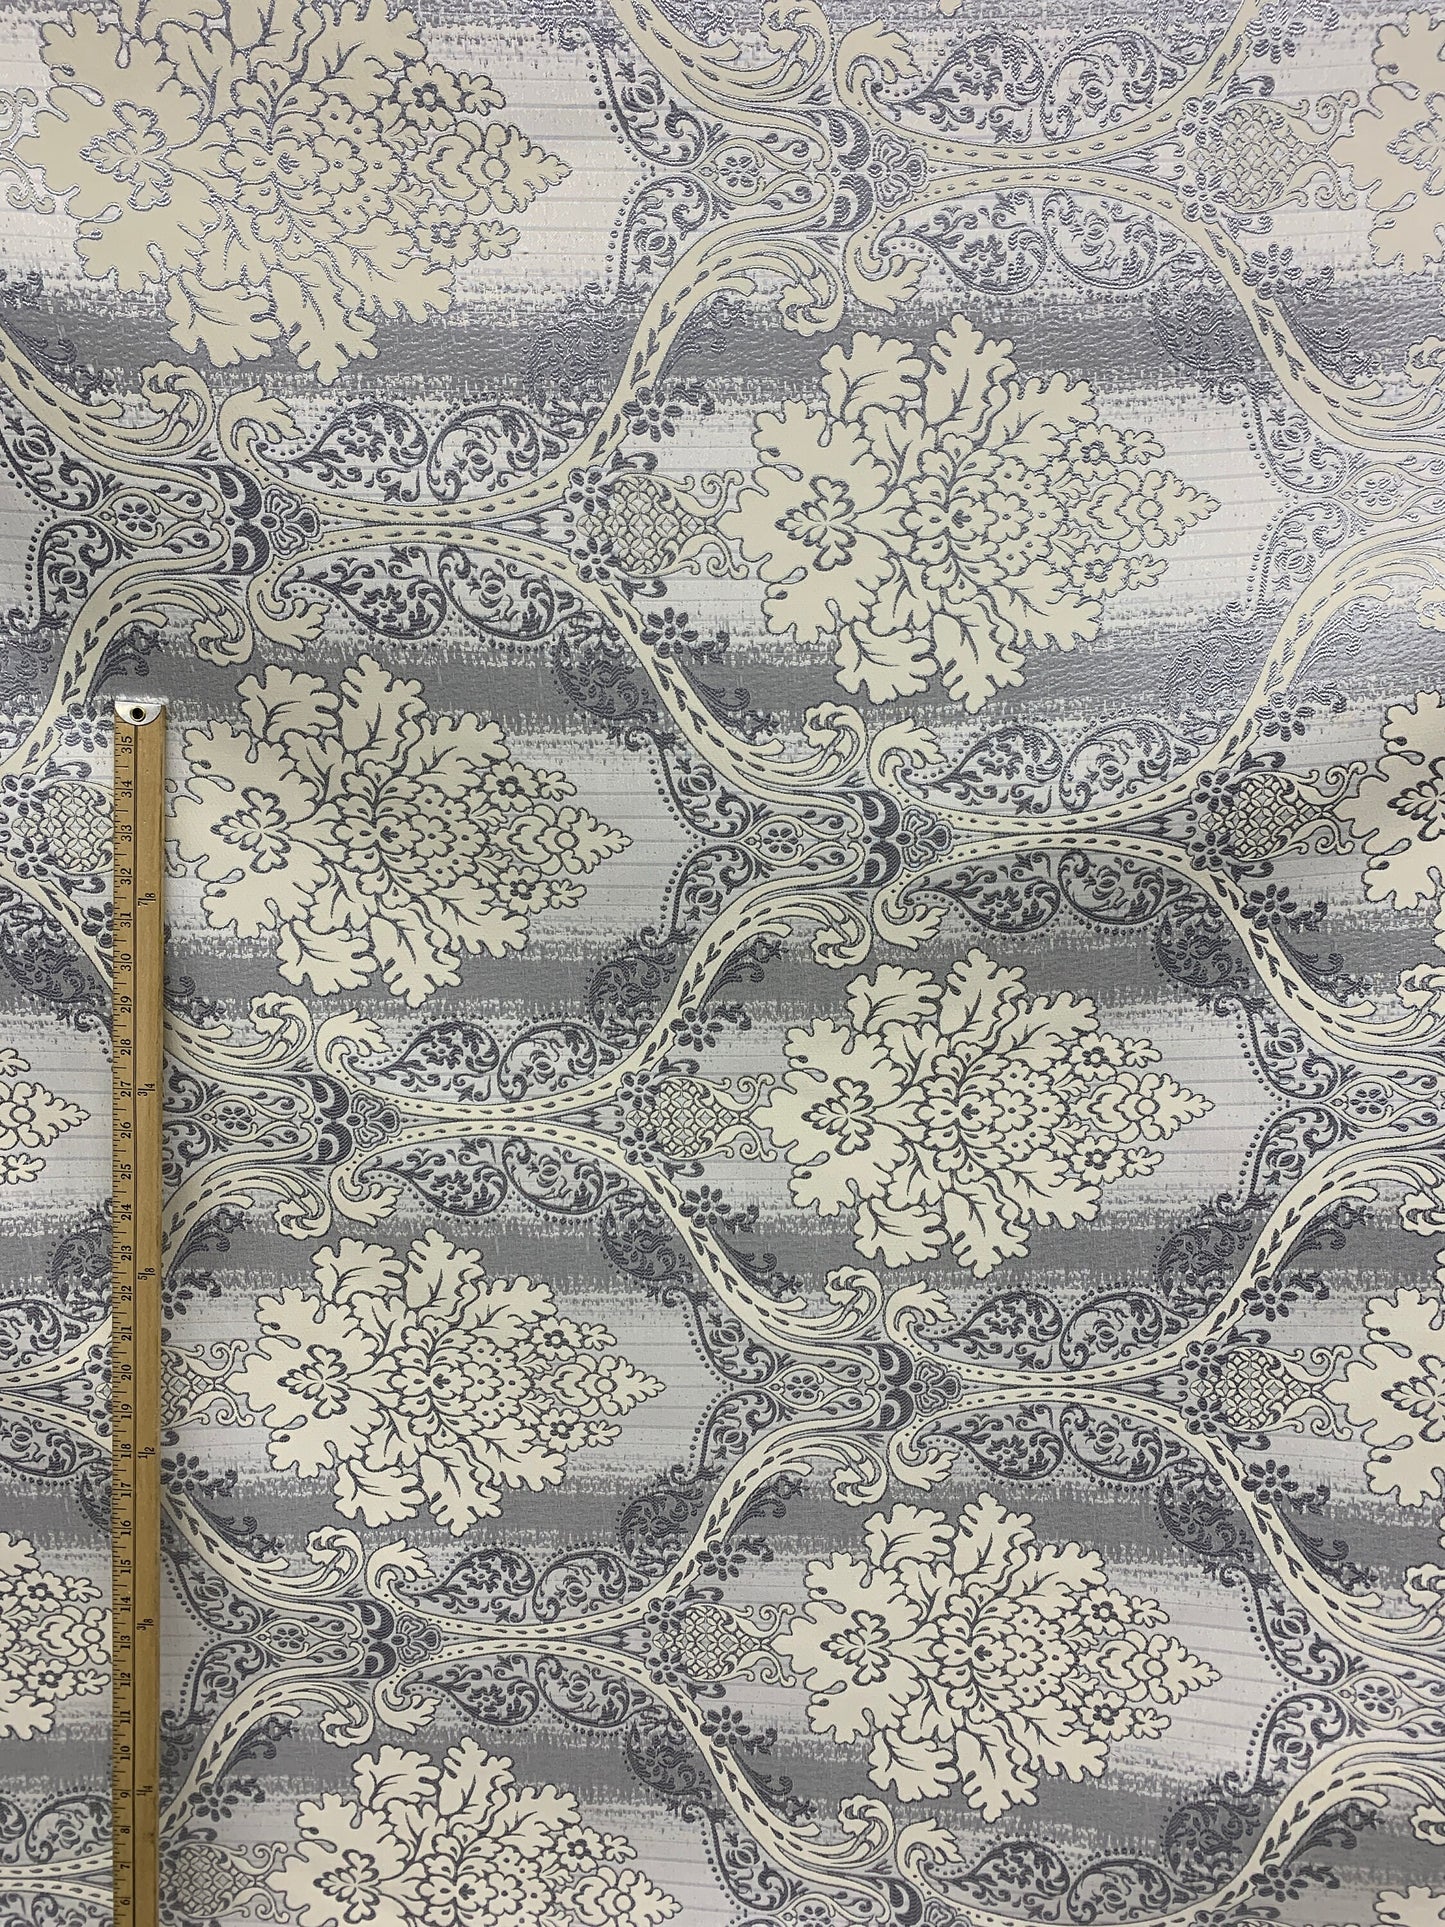 GRAY IVORY Damask Brocade Upholstery Drapery Fabric (110 in.) Sold By The Yard